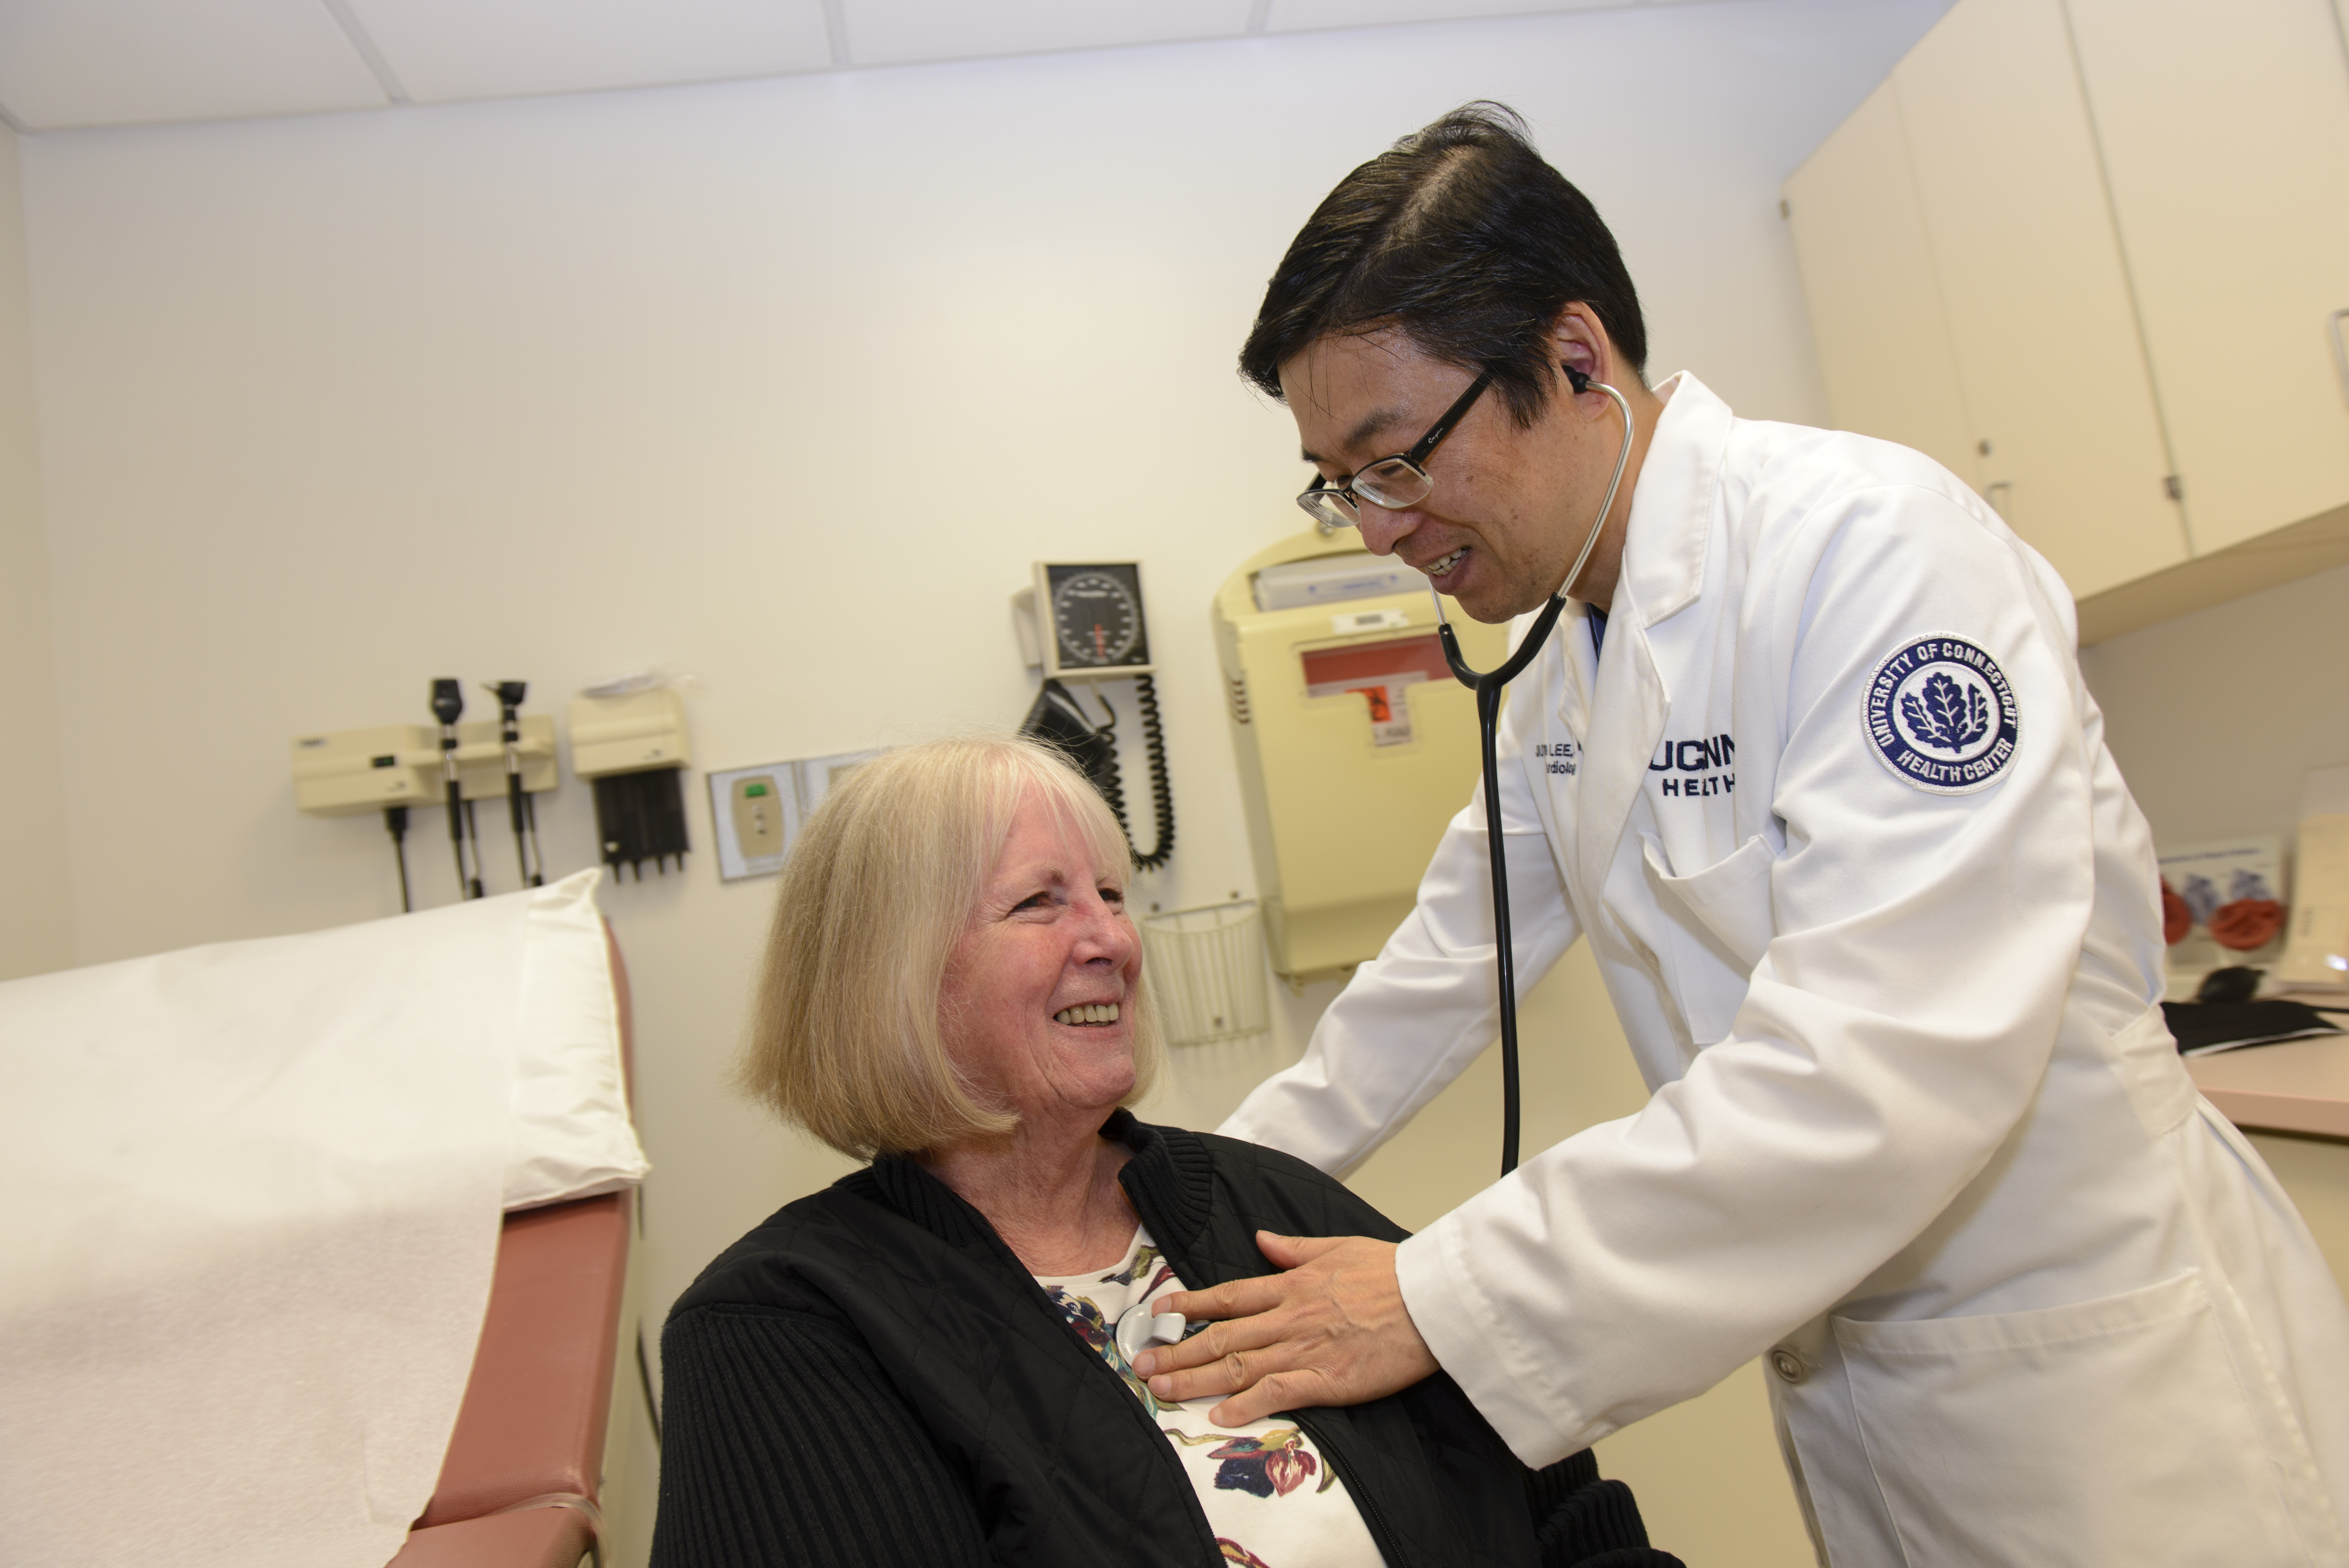 After her Fitbit alerted her to serious heart trouble, 73-year-old Patricia Lauder was successfully treated at UConn Health's Calhoun Cardiology Center by cardiologist Dr. JuYong Lee. (Janine Gelineau/UConn Health Photo)